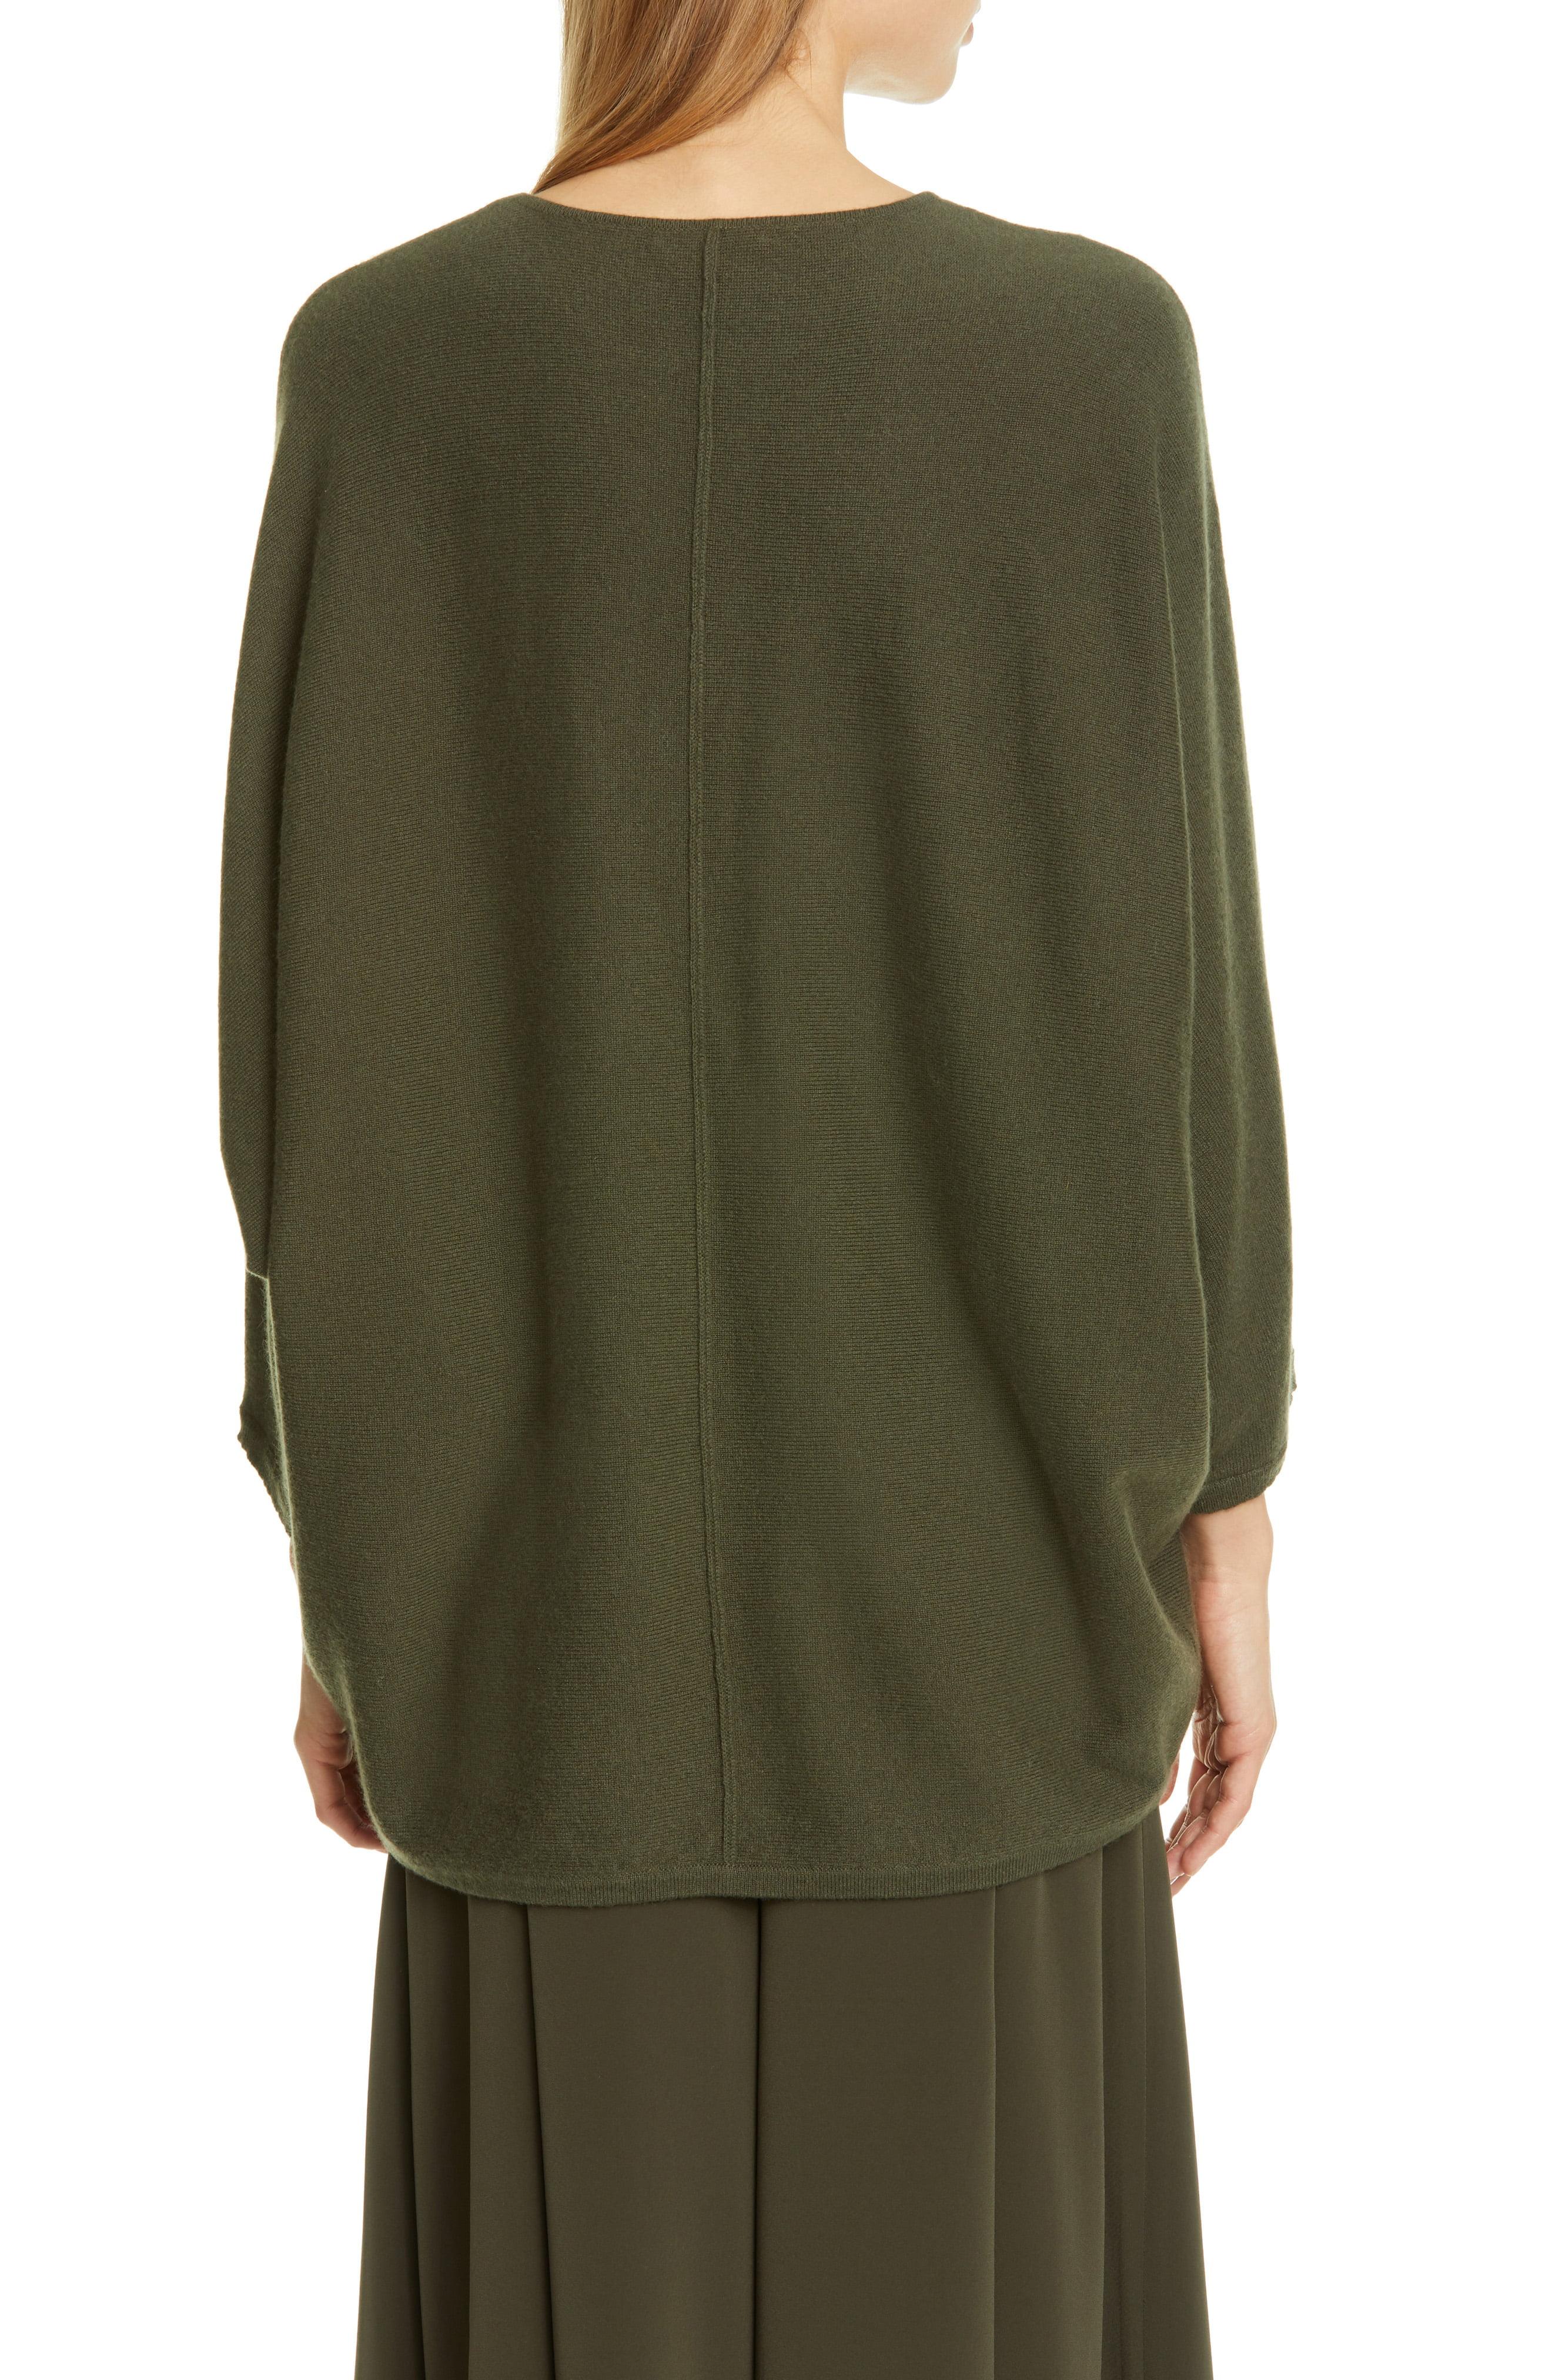 Co. Dolman Sleeve Cashmere Sweater in Olive (Green) - Lyst